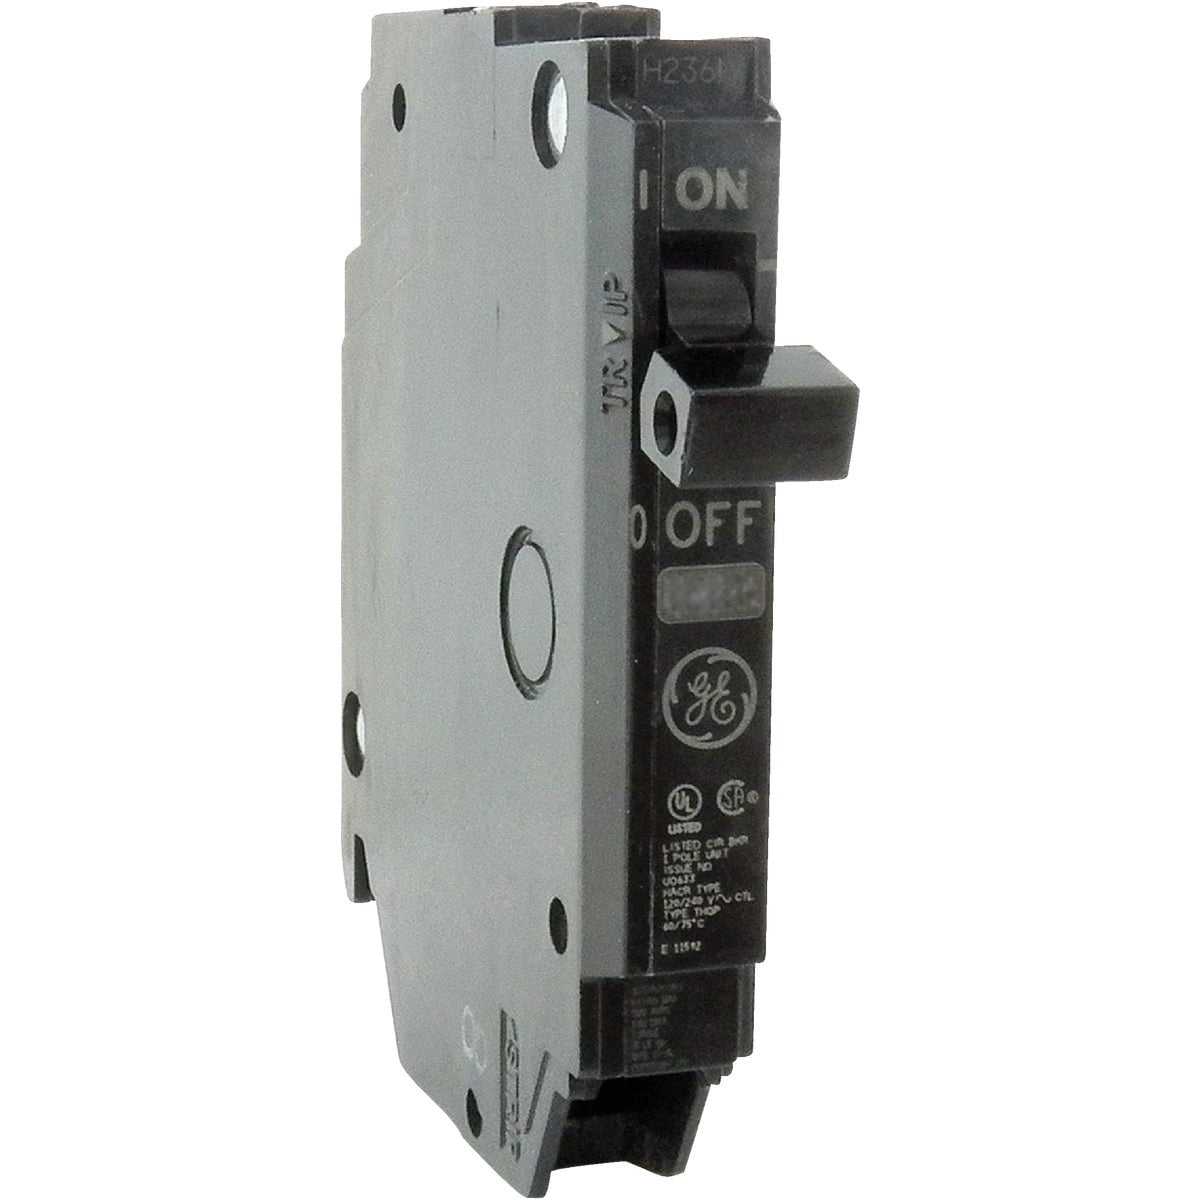 General Electric THQL1120 Circuit Breaker 1-Pole 20-Amp Thick Series GE 